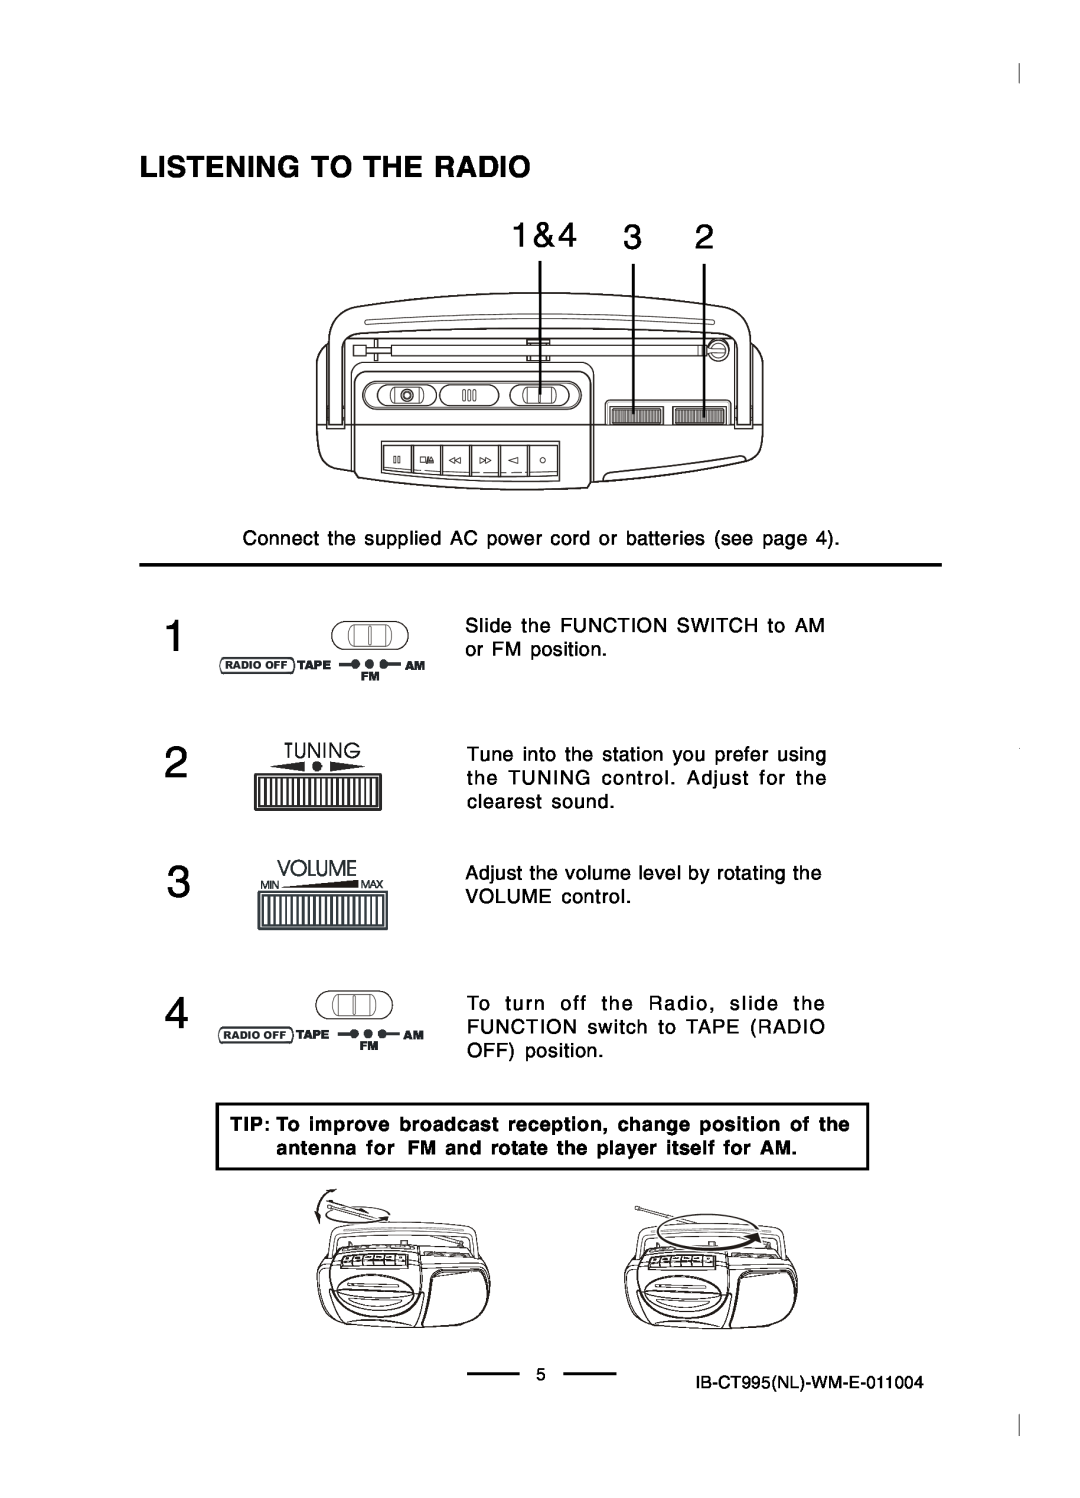 Lenoxx Electronics CT-995 operating instructions Listening To The Radio, Tuning 